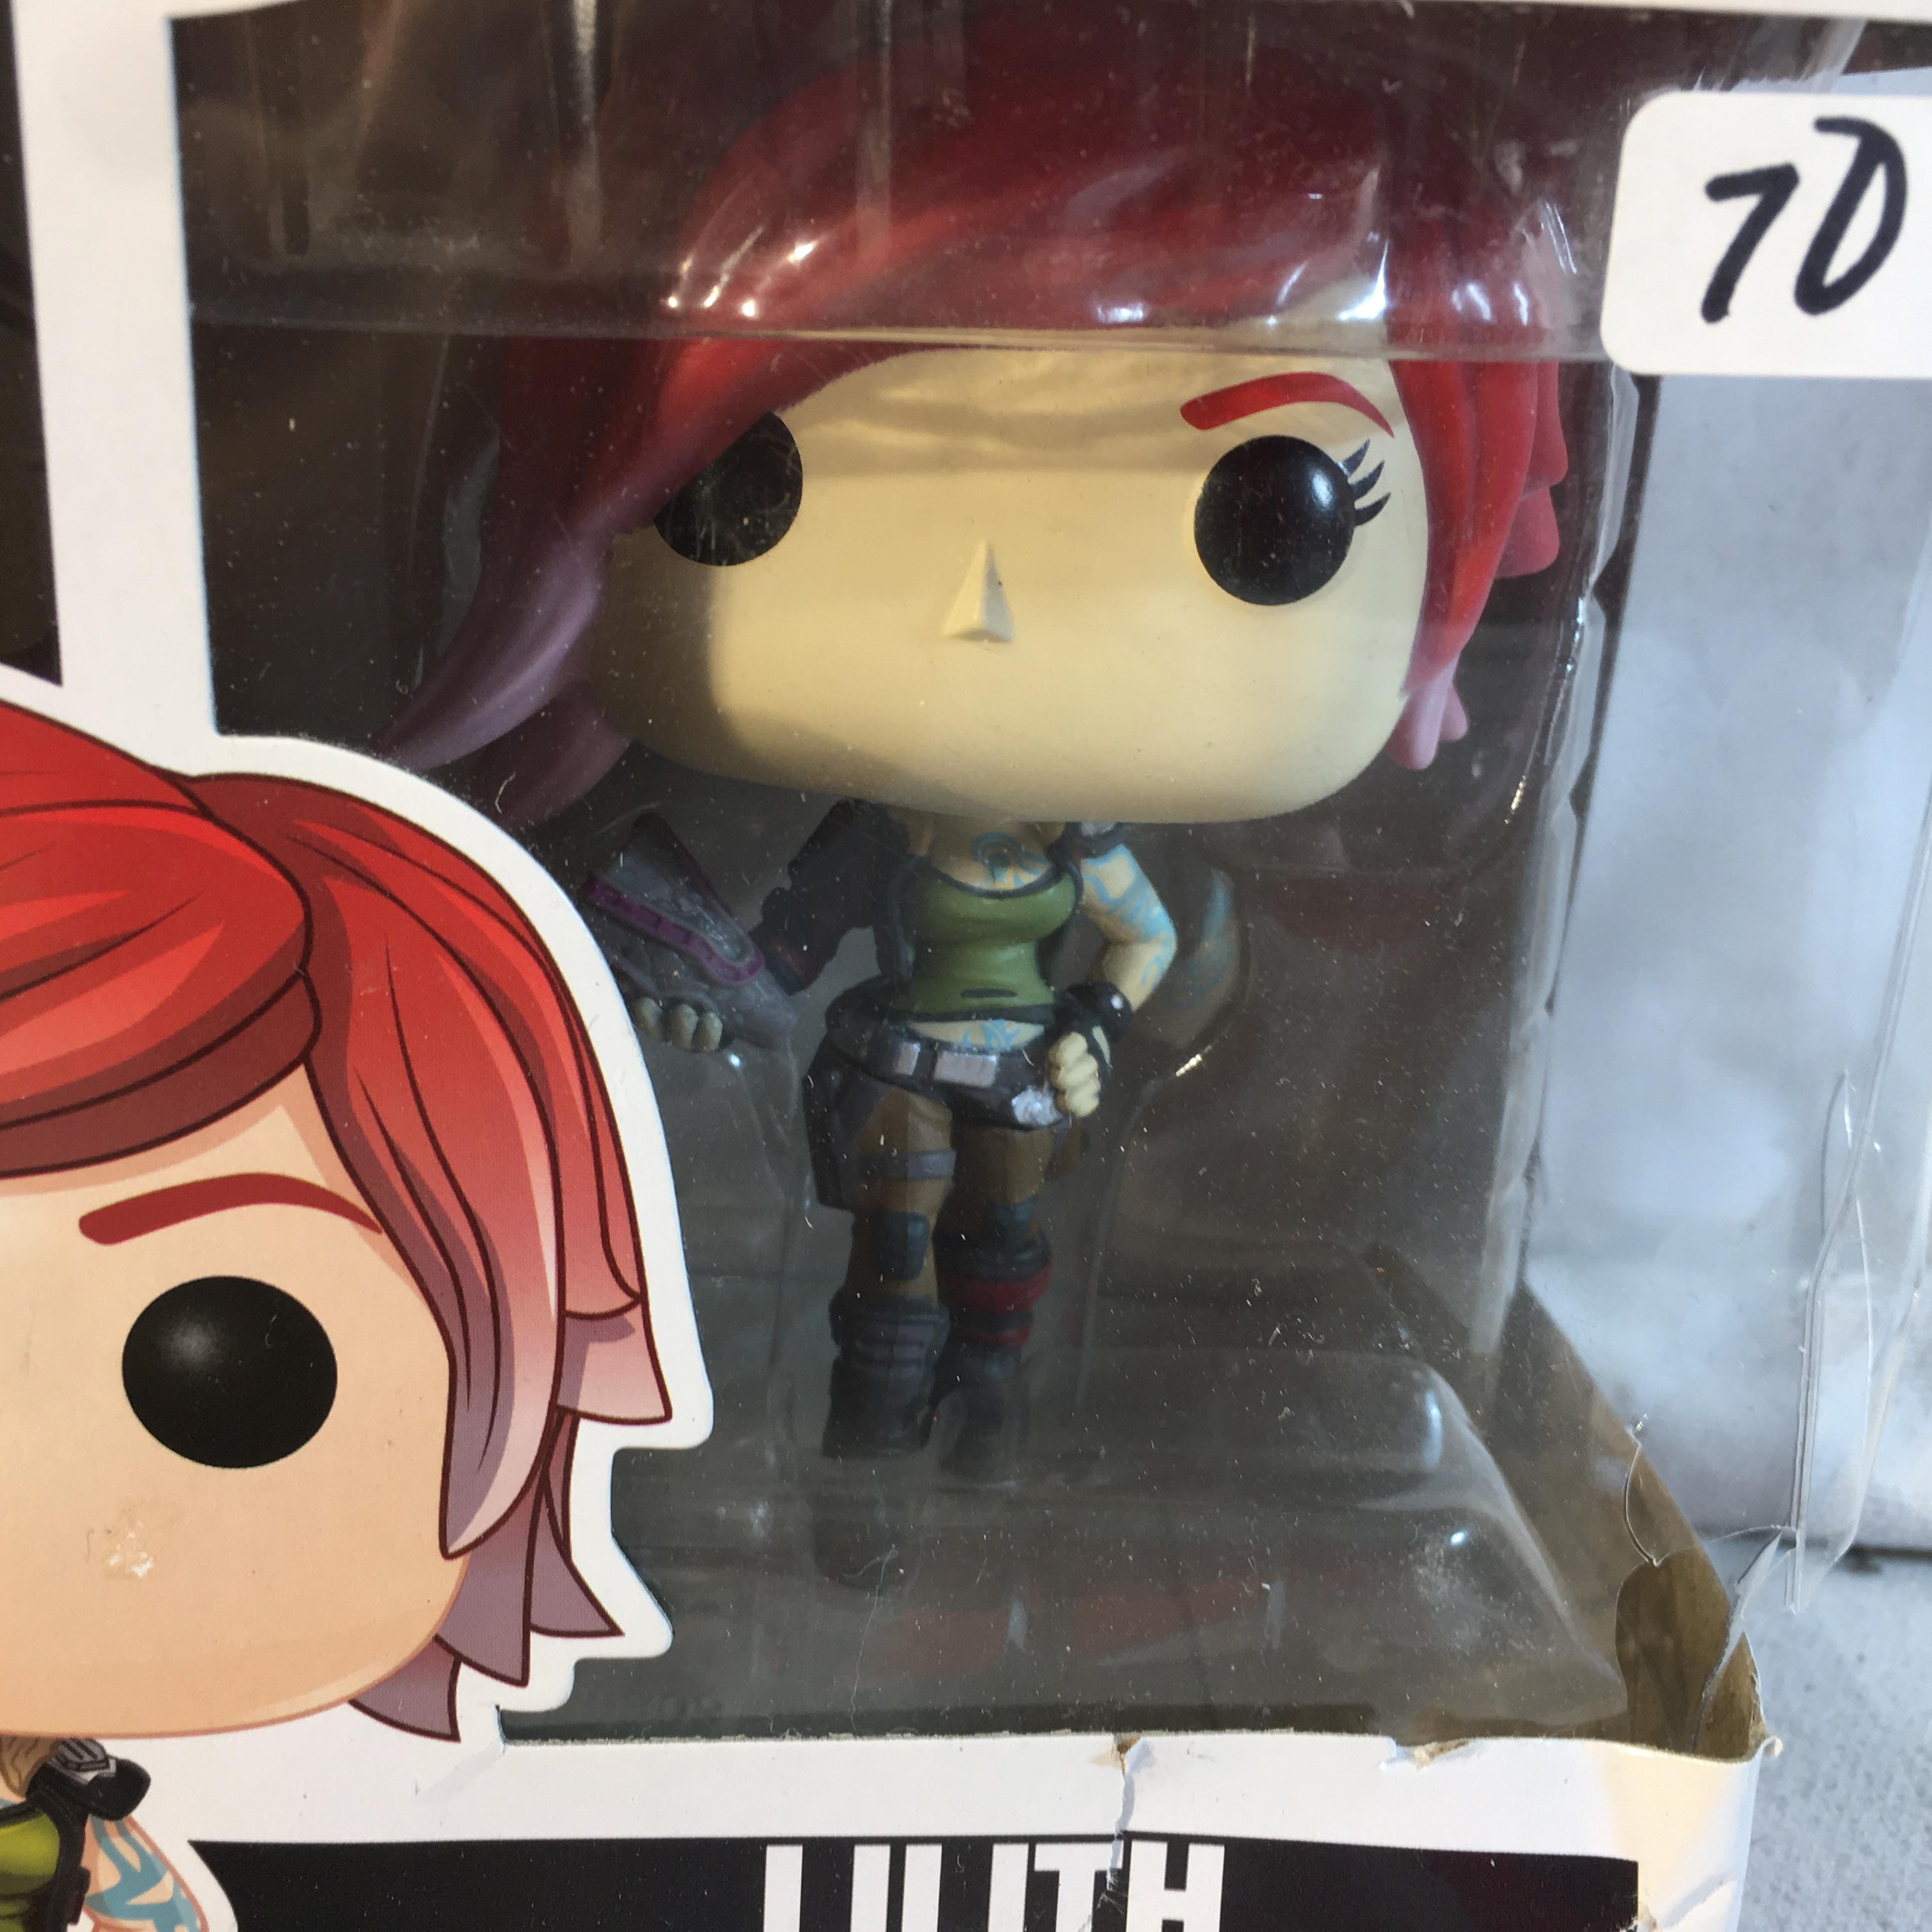 Collector Box is Damage POP Game Borderlands3 #524 Lilith Vinyl Figure 6.1/2" Tall Funko